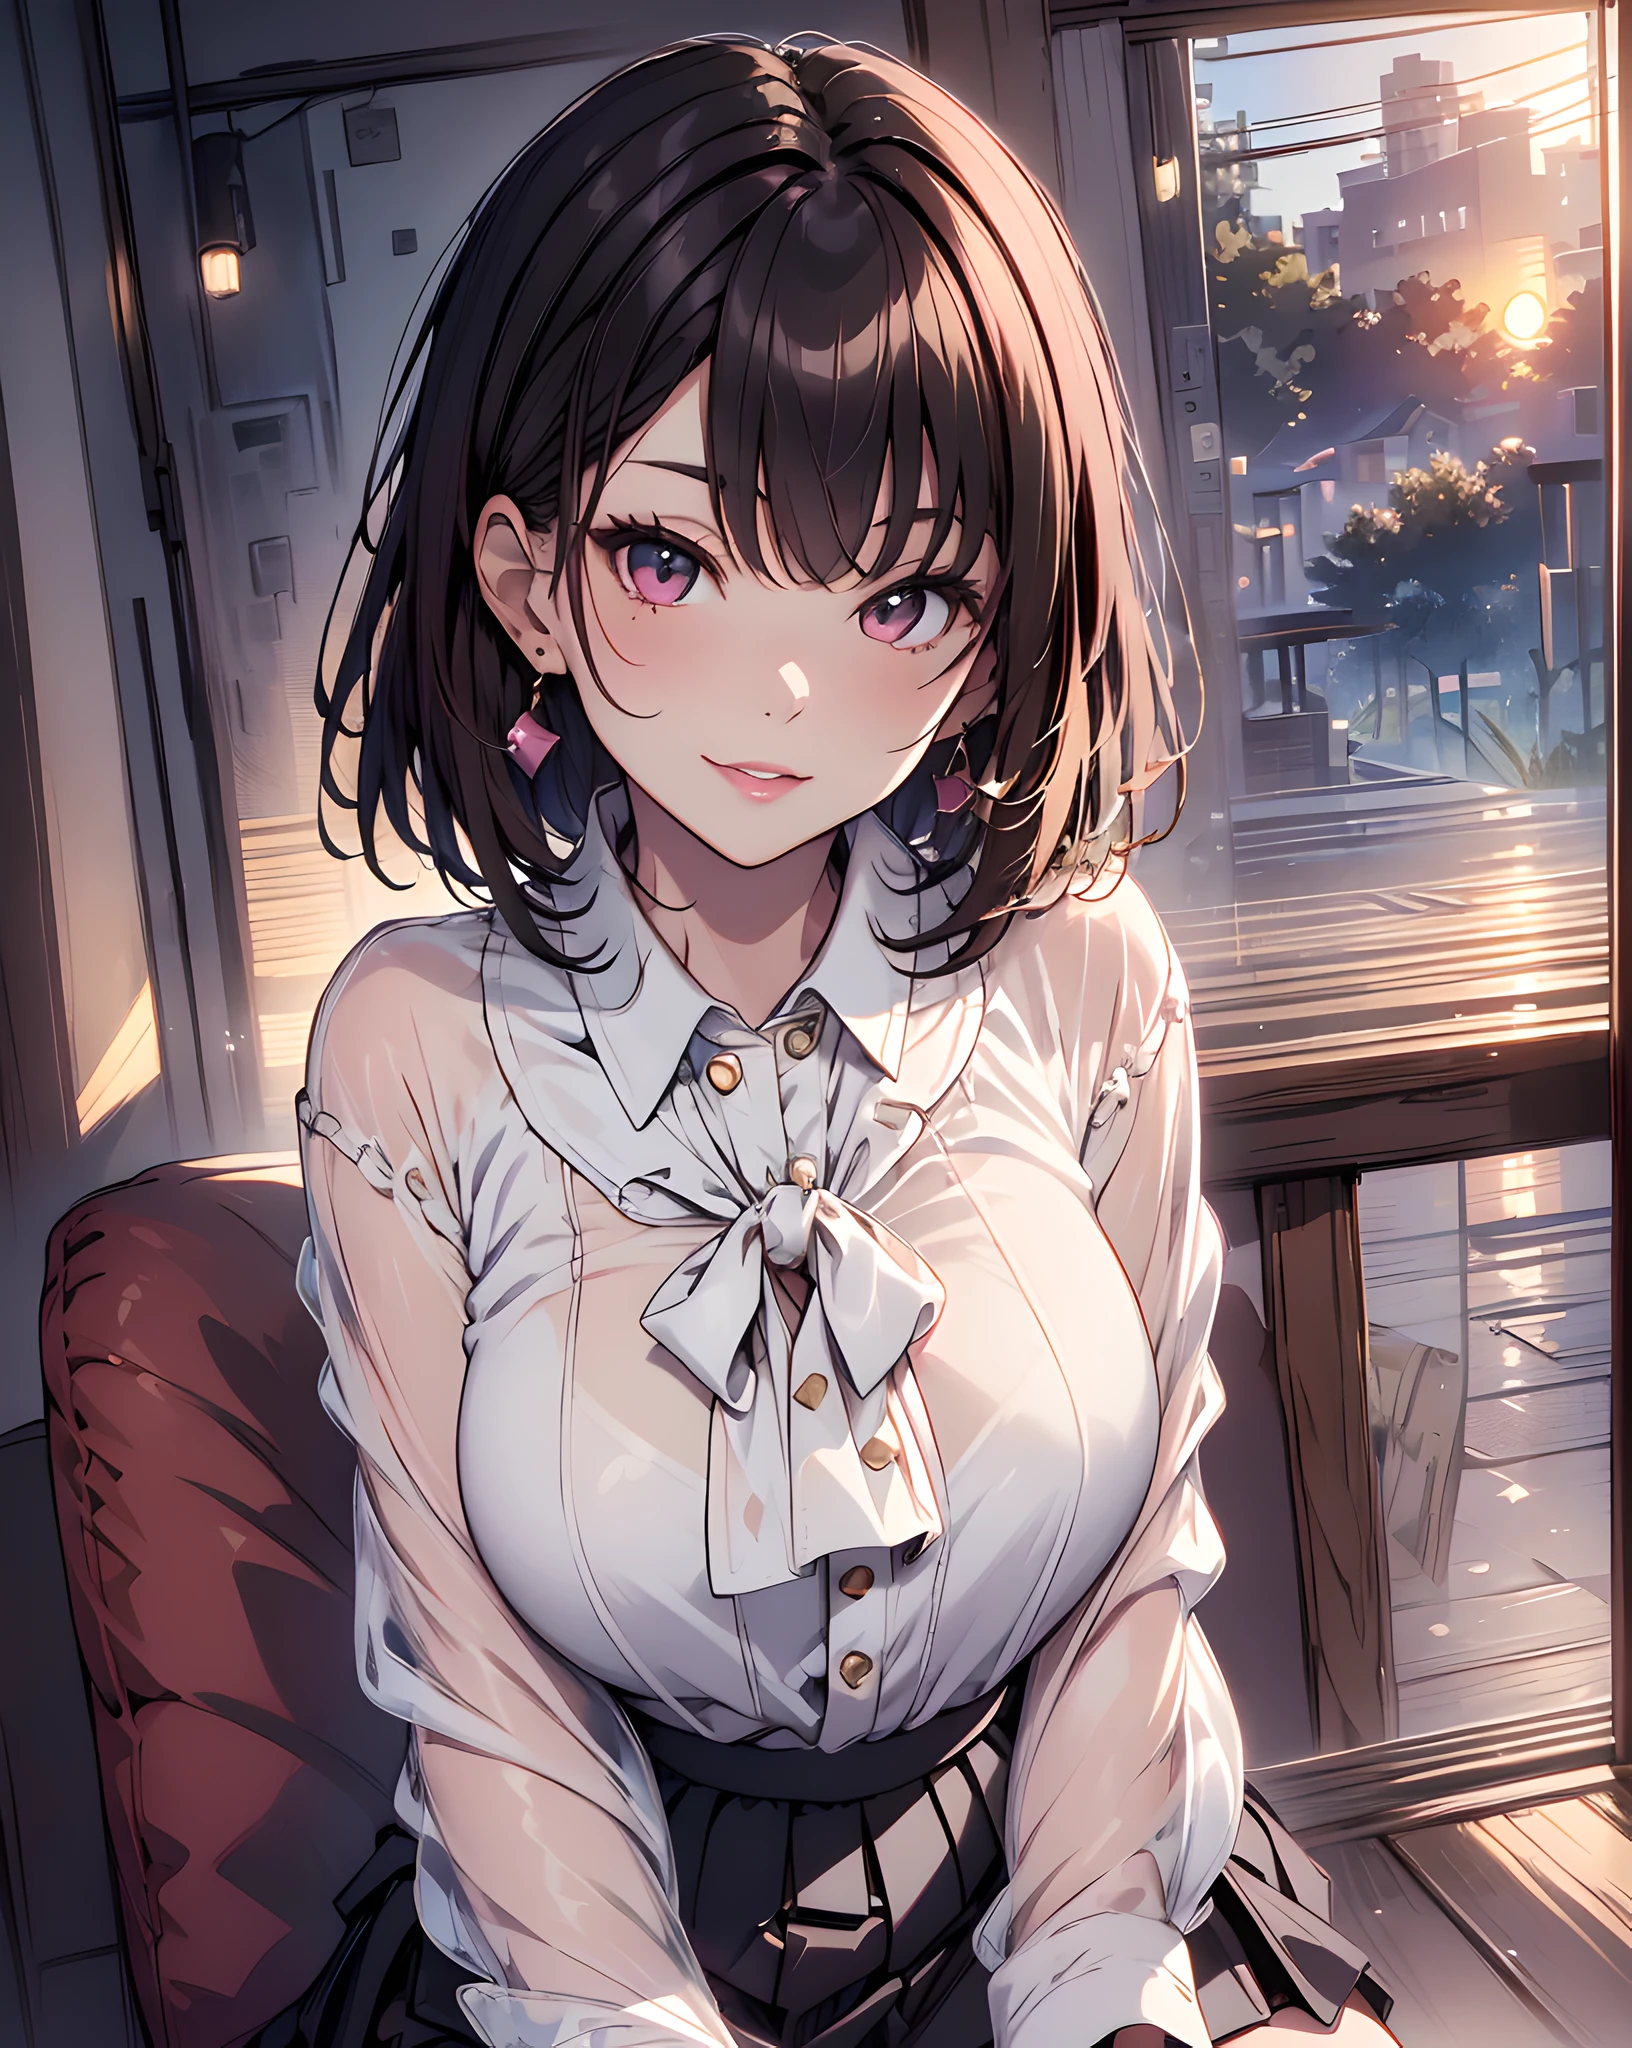 (((head out of frame,close-up lips))), (masterpiece, best quality:1.37), highres, ultra-detailed, ultra-sharp, BREAK, Korean office queen, (((1girl:1.37, solo))), (beautiful anime face, cute face, detailed face), (brown hair, thin hair, short hair, bangs, hime-cut), detailed beautiful cyan eyes, BREAK, ((detailed blouse:1.5)), (detailed short skirt:1.5), BREAK, lovely look, earing, detailed clothes), light smile, closed mouth, parted lips, pink lipstick, BREAK, ((sitting the couch, spread legs, hands between legs, leaning forward)), detailed human hands, HDTV:1.2, ((detailed sunset office room view background:1.3)), 8 life size, slender, anime style, anime style school girl, perfect anatomy, perfect proportion, inspiration from Kyoto animation and A-1 picture, late evening, excellent lighting, bright colors, clean lines, photorealistic